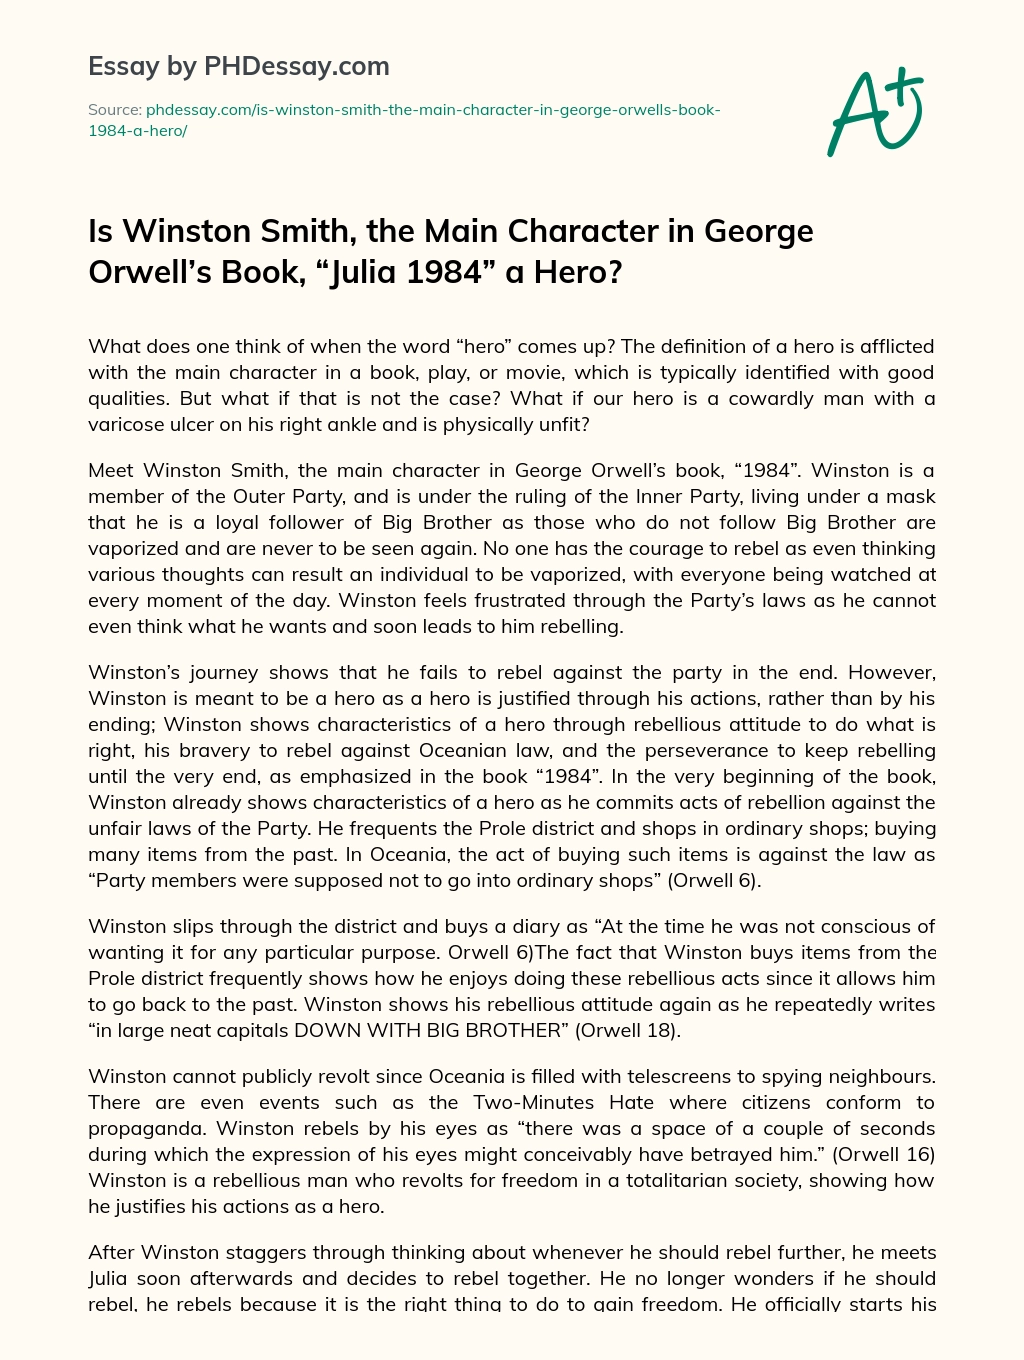 Is Winston Smith The Main Character In George Orwell S Book Julia 1984 A Hero Phdessay Com